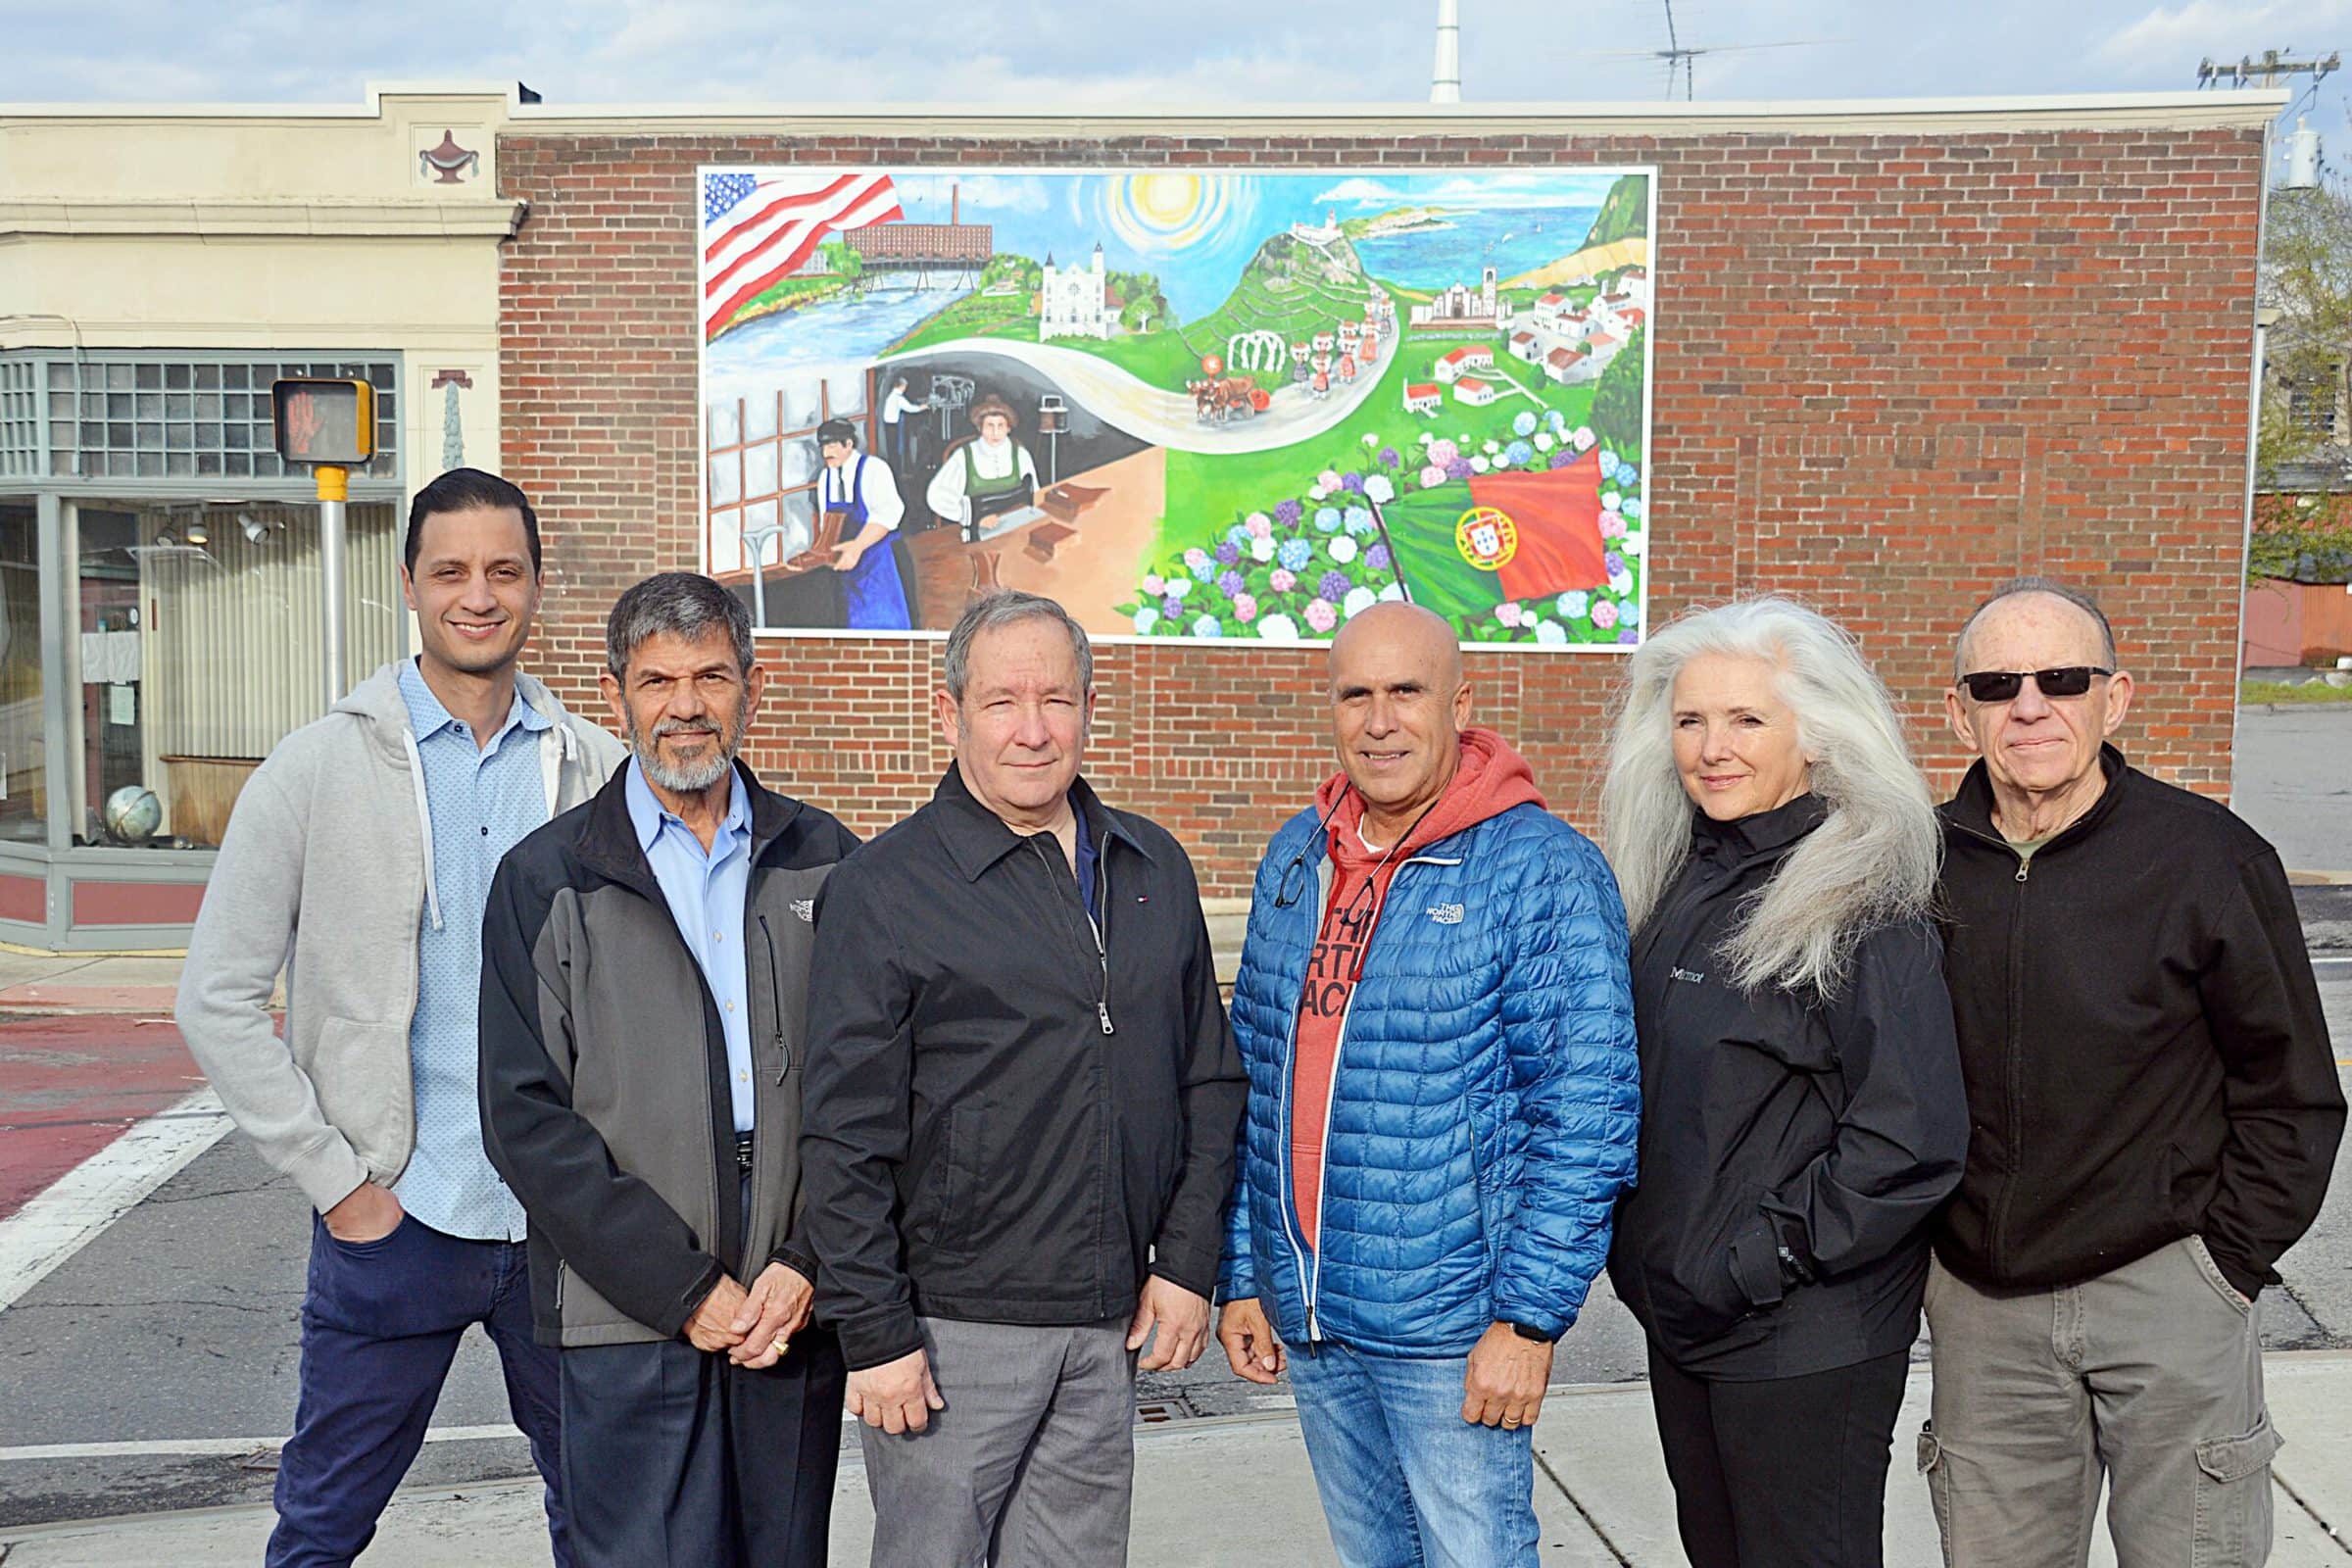 New historical mural depicts migration from Portugal to Hudson